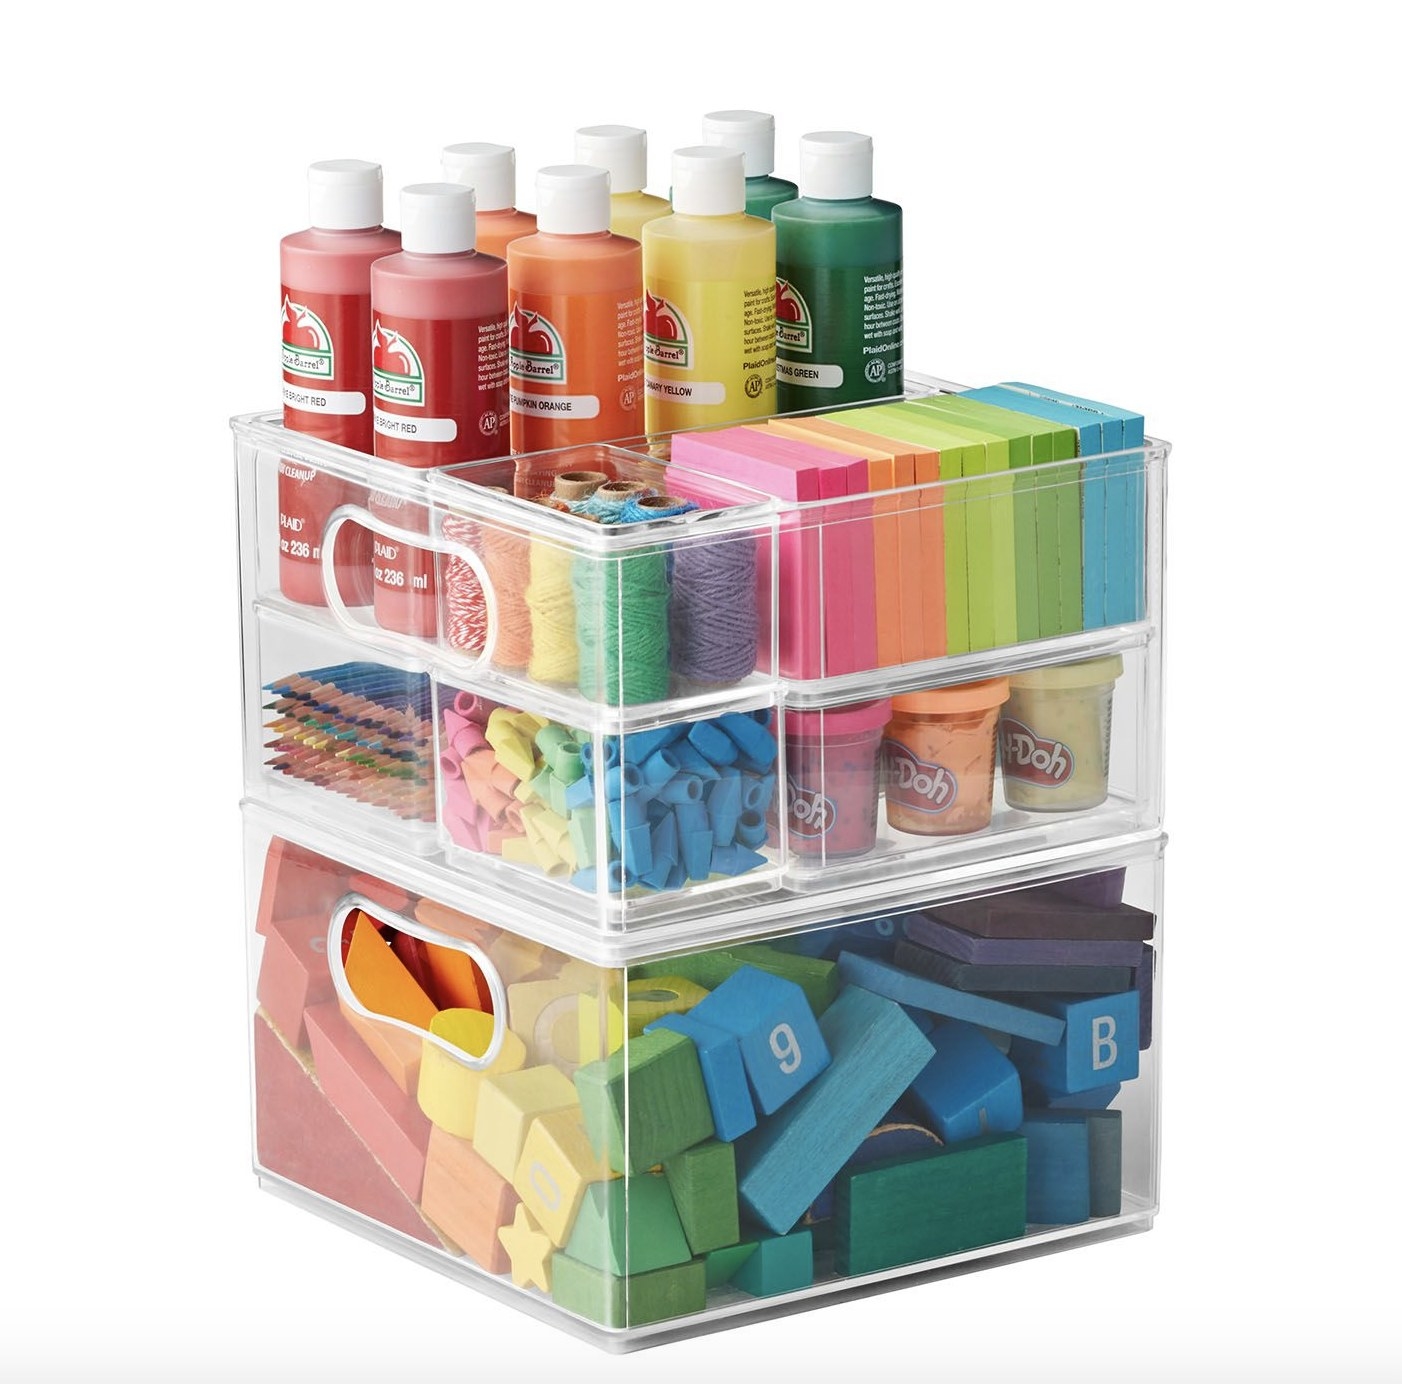 The plastic drawers have multicolored supplies inside